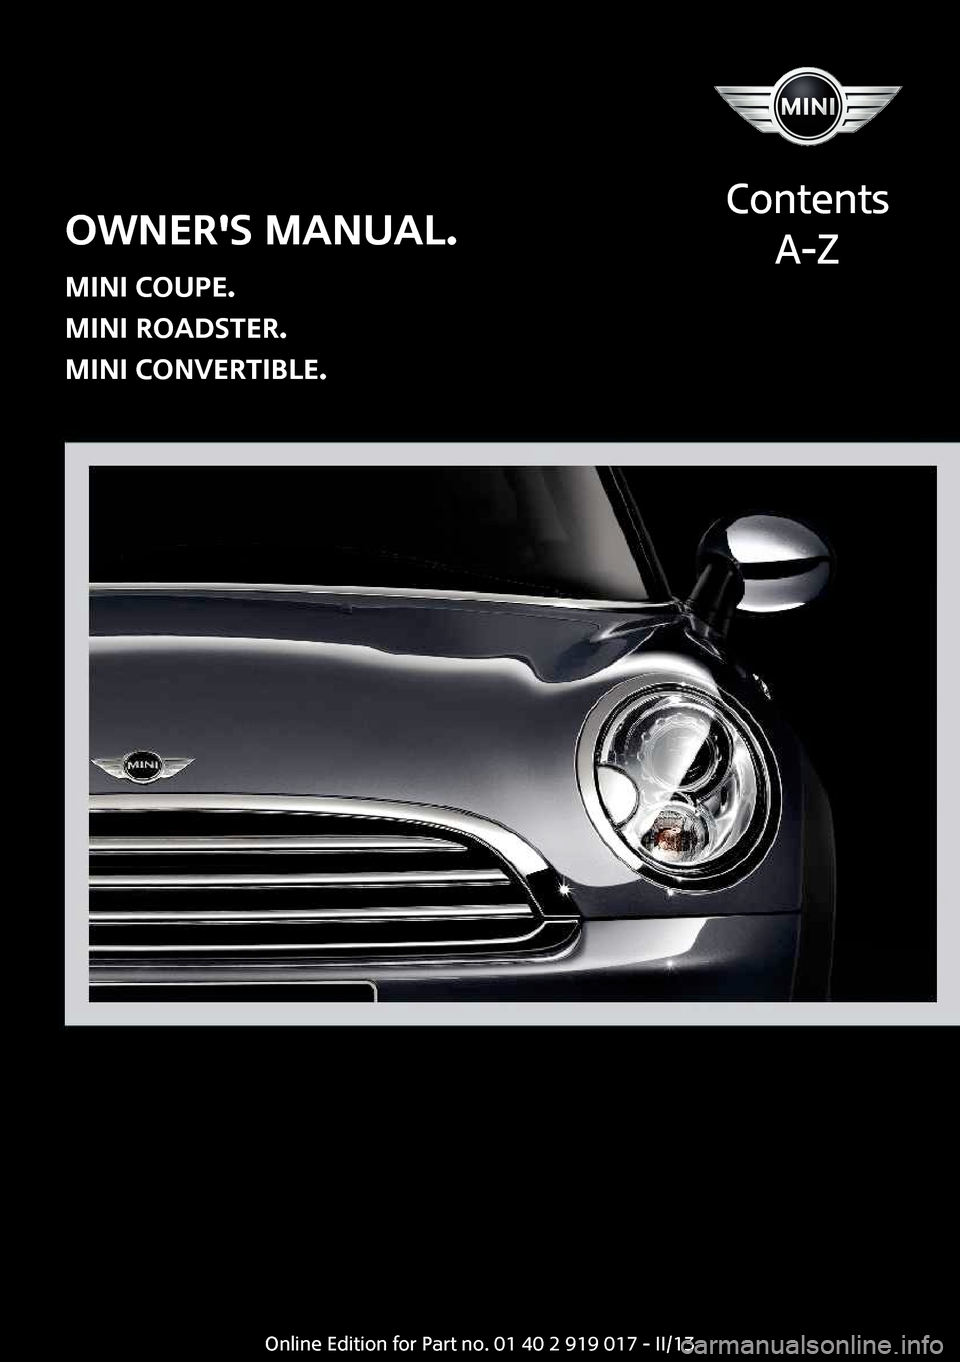 MINI Roadster 2013  Owners Manual Owners Manual.
MINI Coupe.
MINI Roadster.
MINI Convertible.
Contents
A-ZOnline Edition for Part no. 01 40 2 919 017 - II/13  